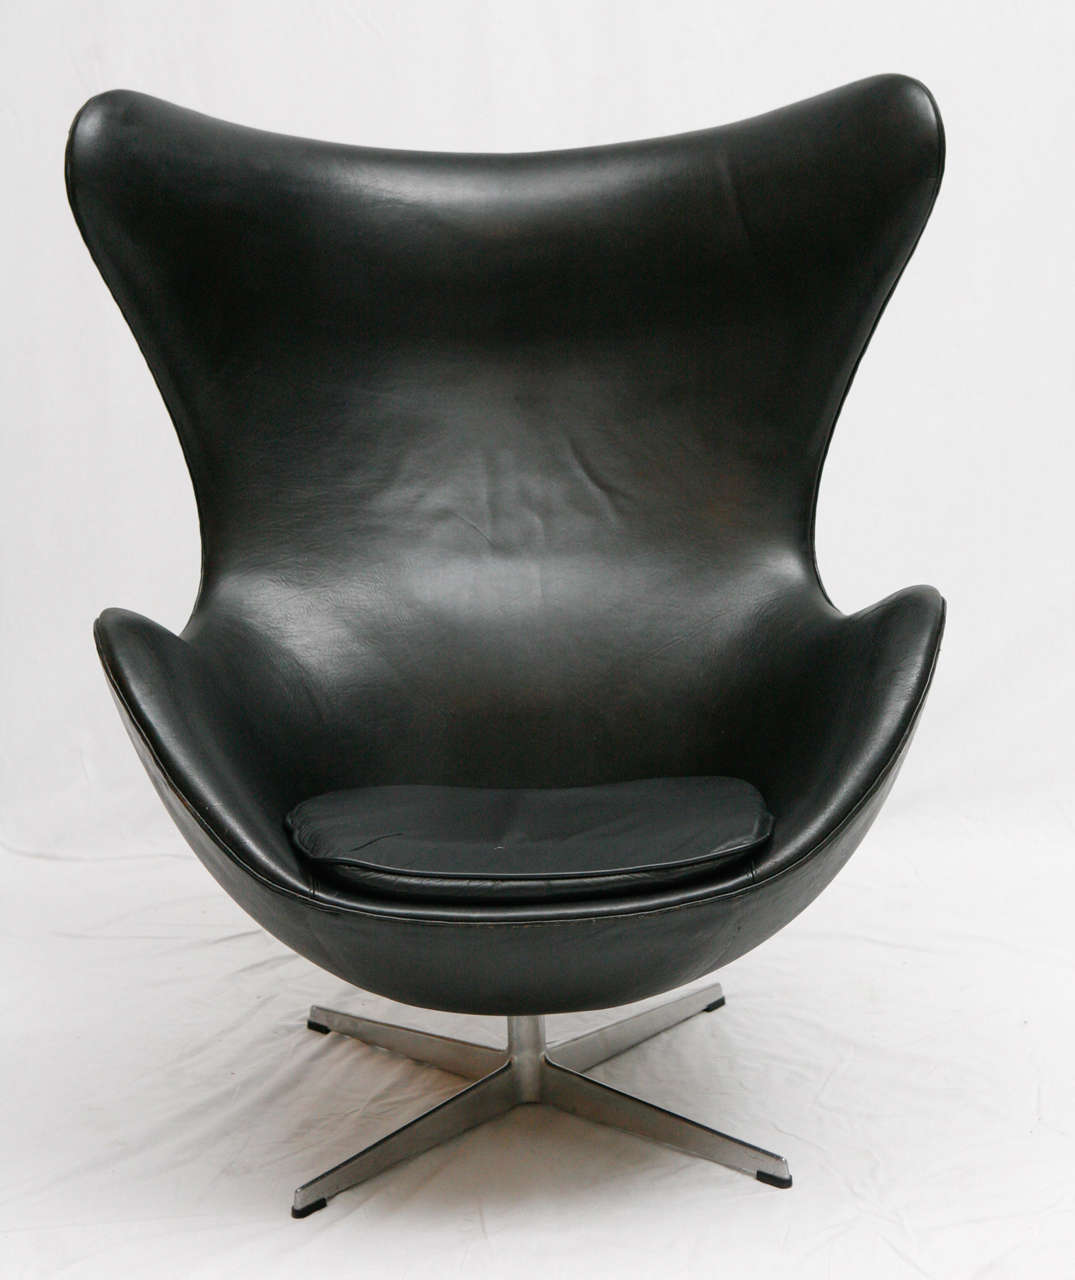 Vintage Black Leather Arne Jacobsen Egg Chair.  Original Leather in Very Good Condition.  Seat Cushion Was Replaced 
A long Time Ago. I Got It From The Original Family That Purchased It In The 60's